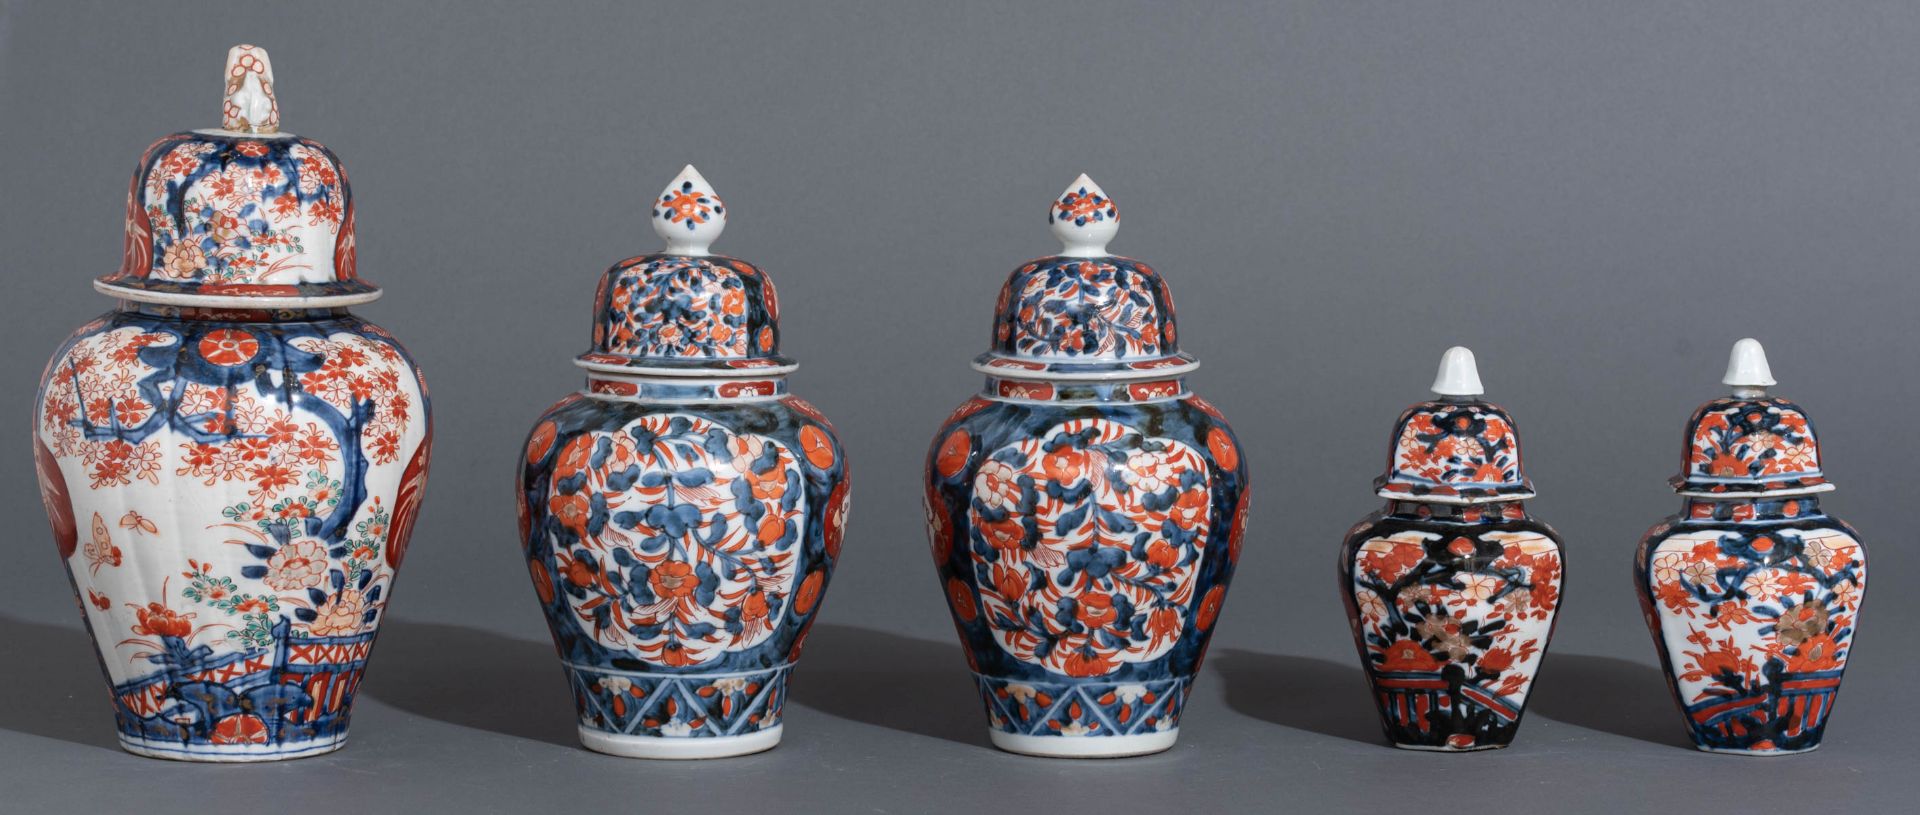 A collection of five Japanese Imari vases and covers - Image 4 of 9